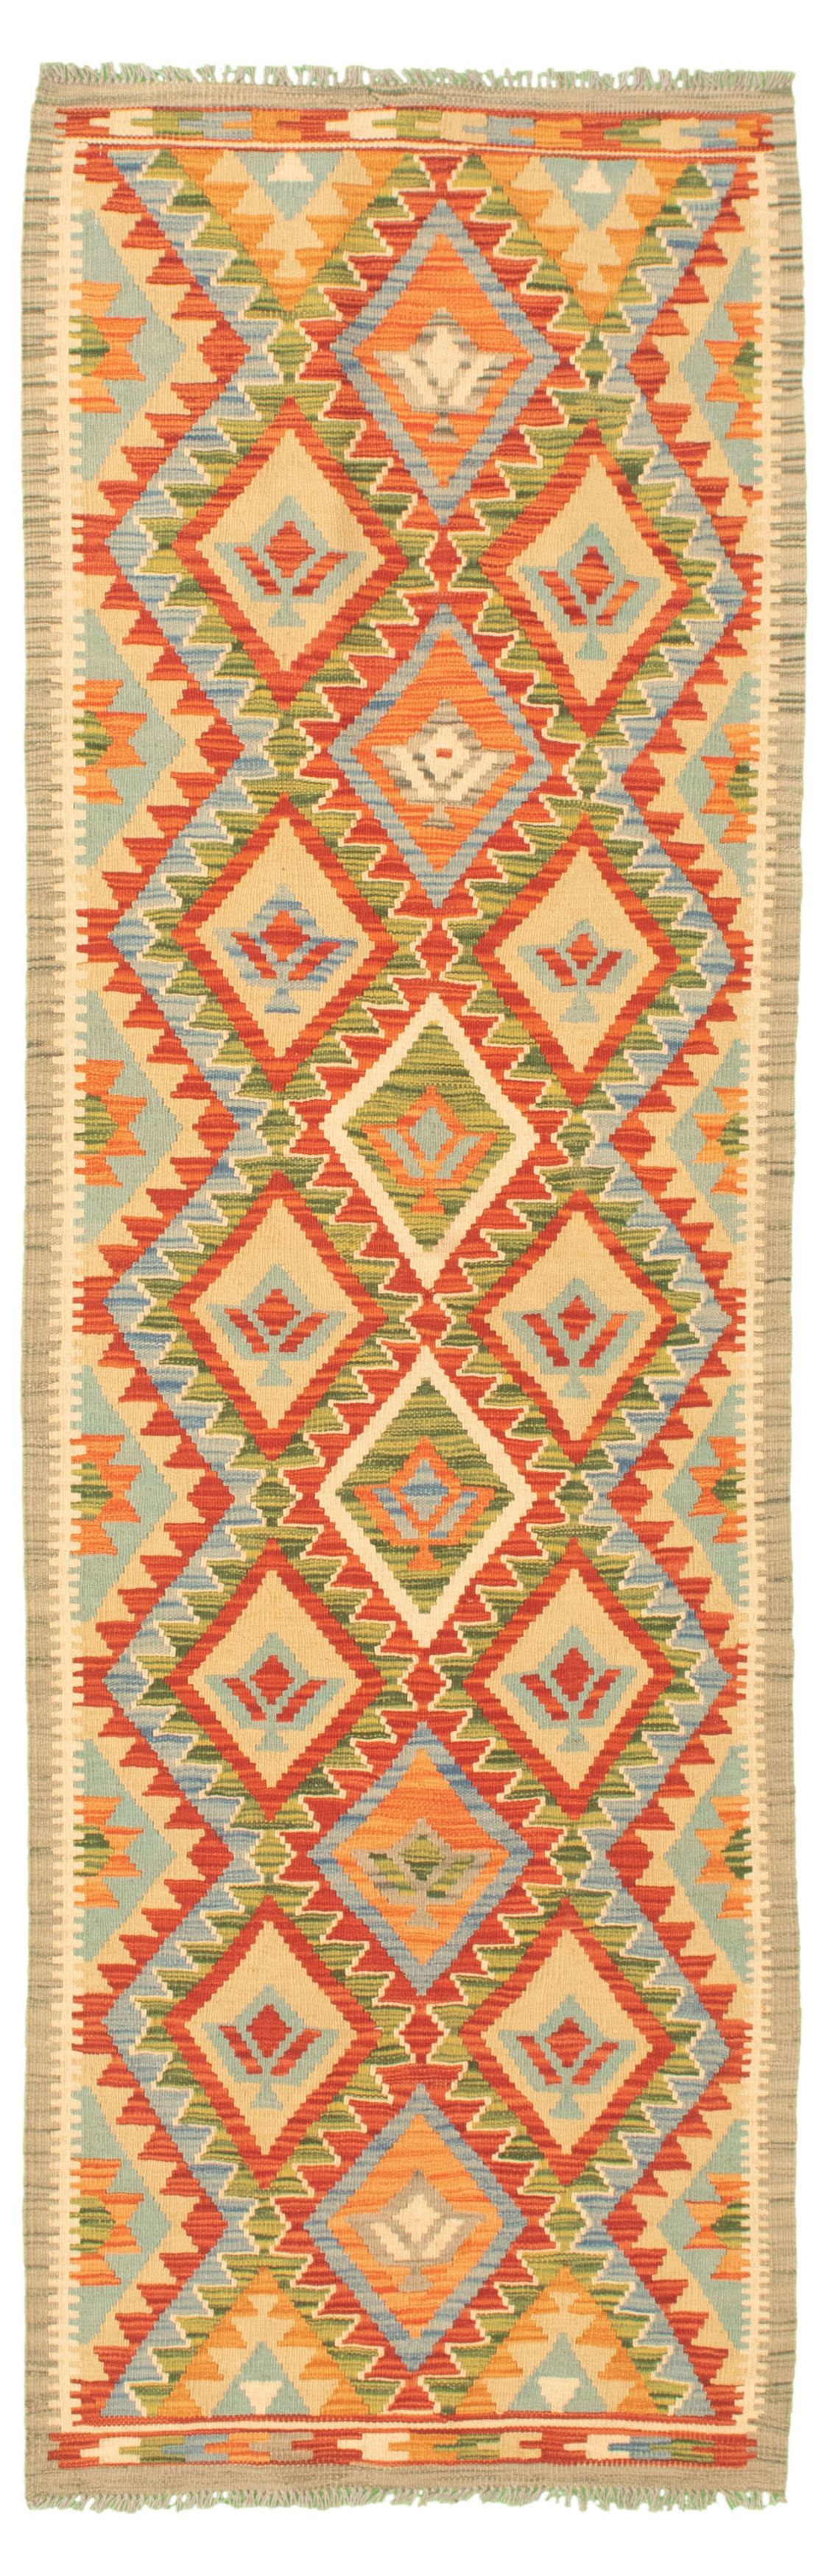 Hand woven Bold and Colorful  Cream Wool Kilim 2'7" x 8'5" Size: 2'7" x 8'5"  